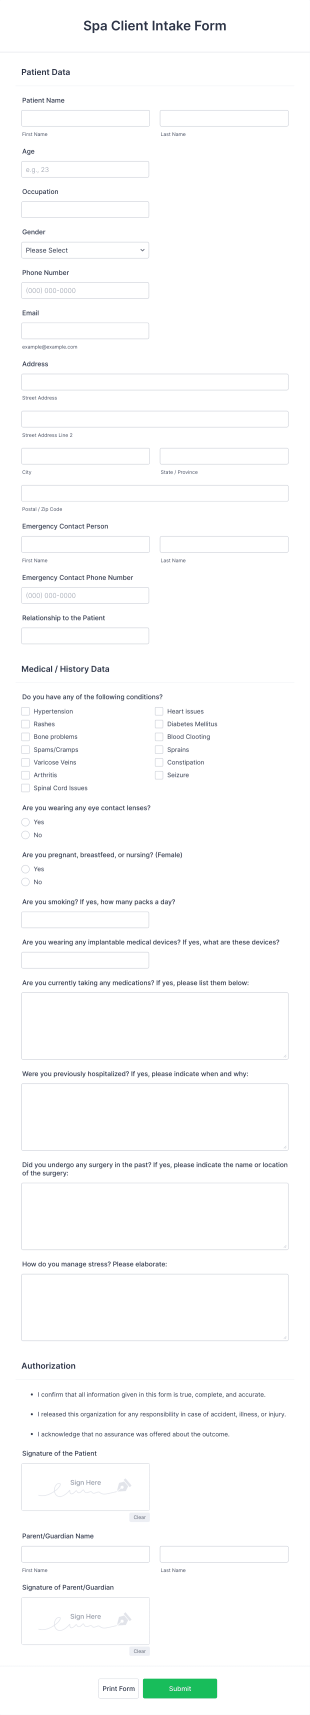 Spa Client Intake Form Template